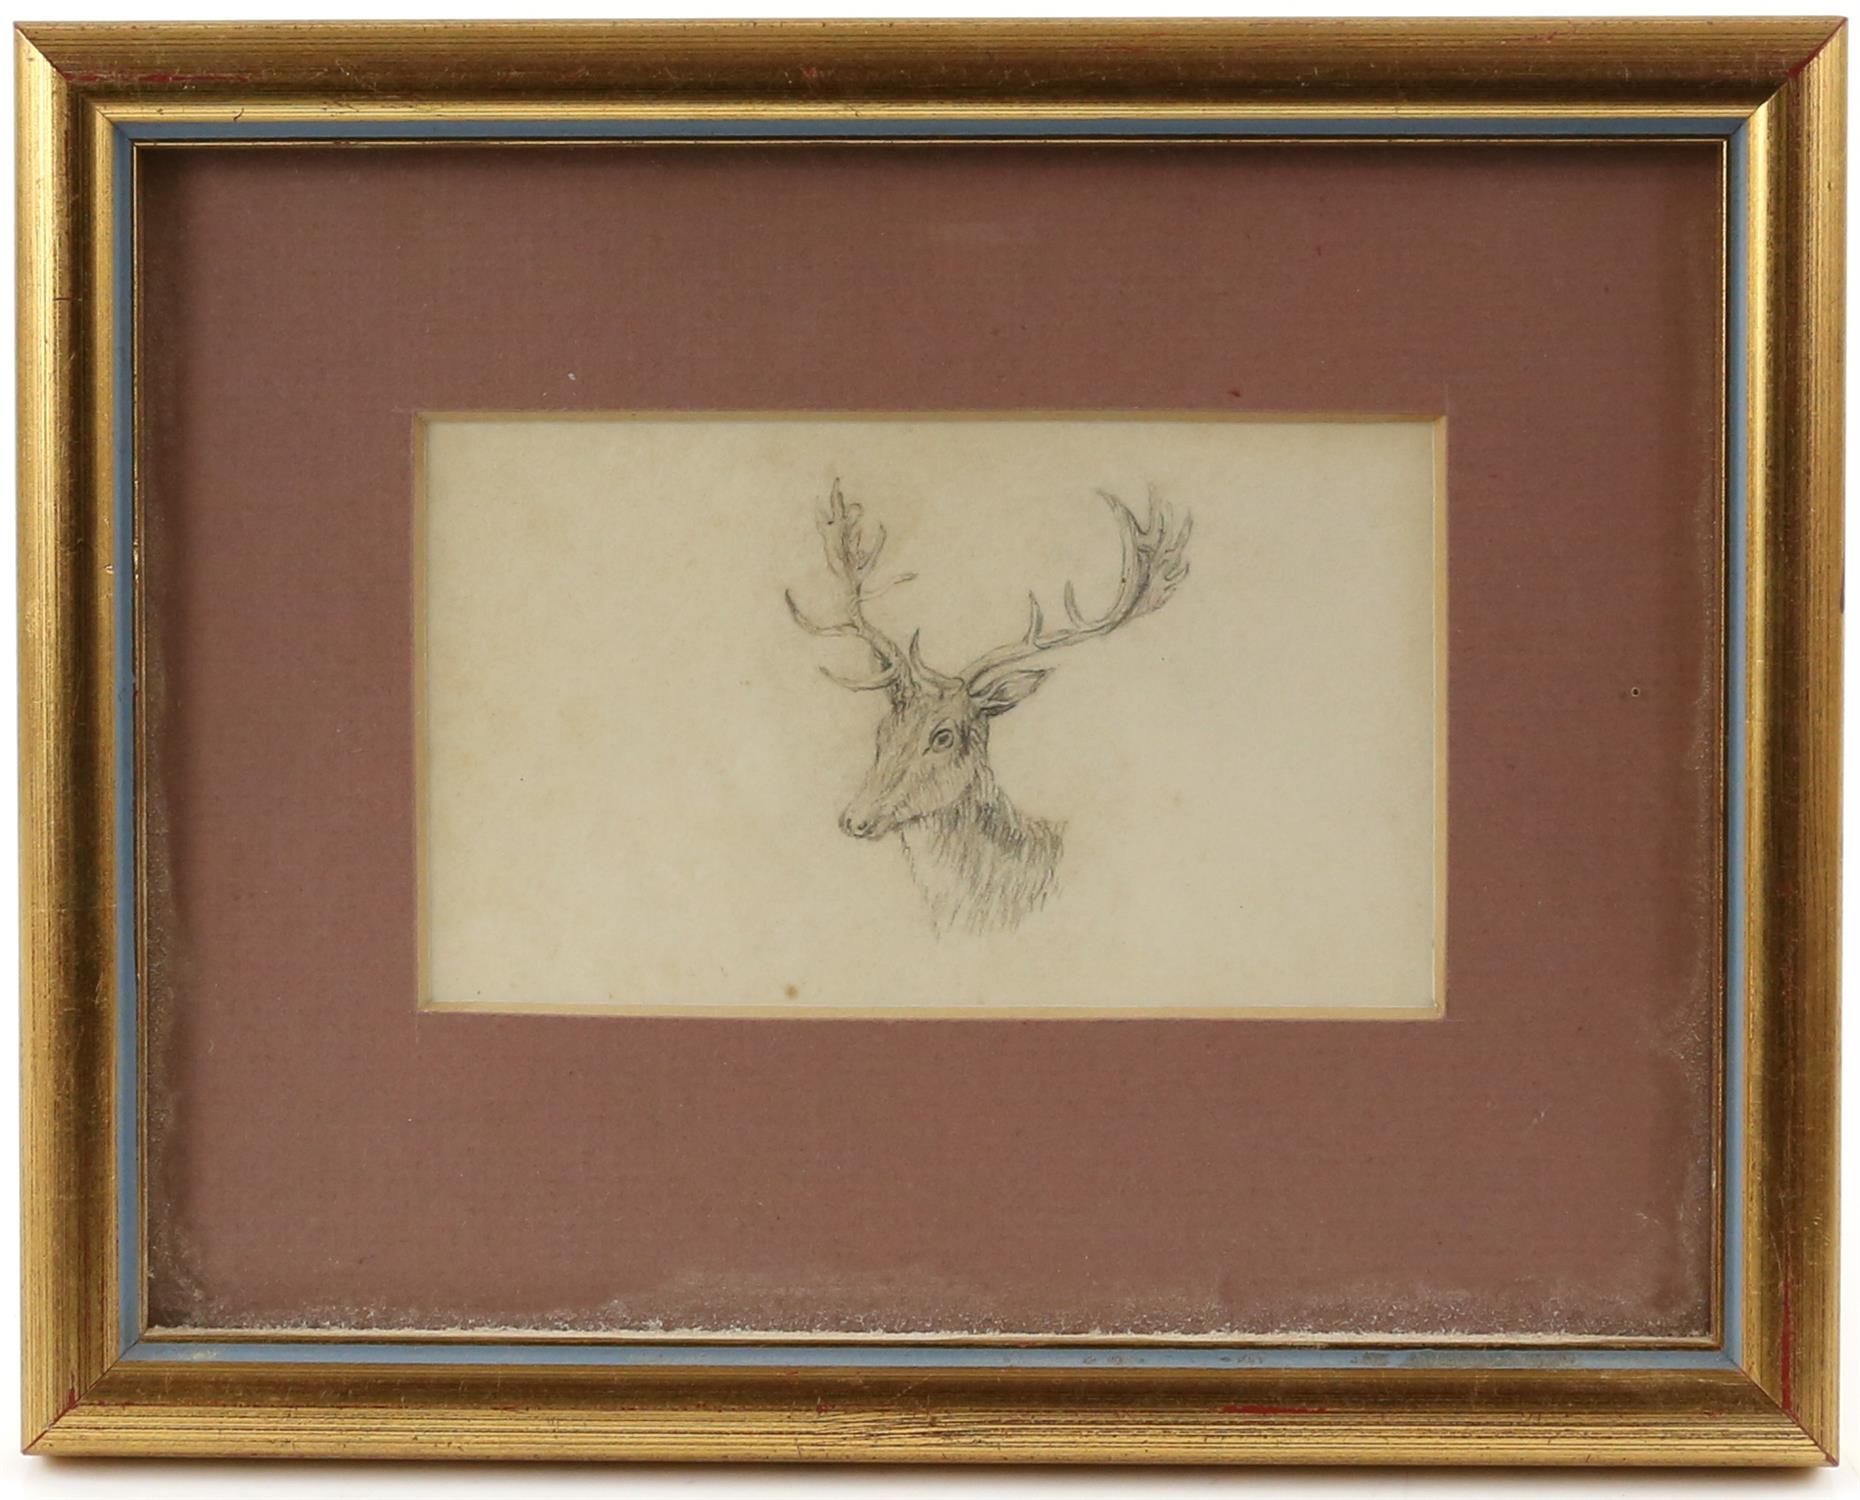 19th century English School, stag's head, pencil drawing, 6.5cm x 11cm, From the property of a - Image 2 of 3